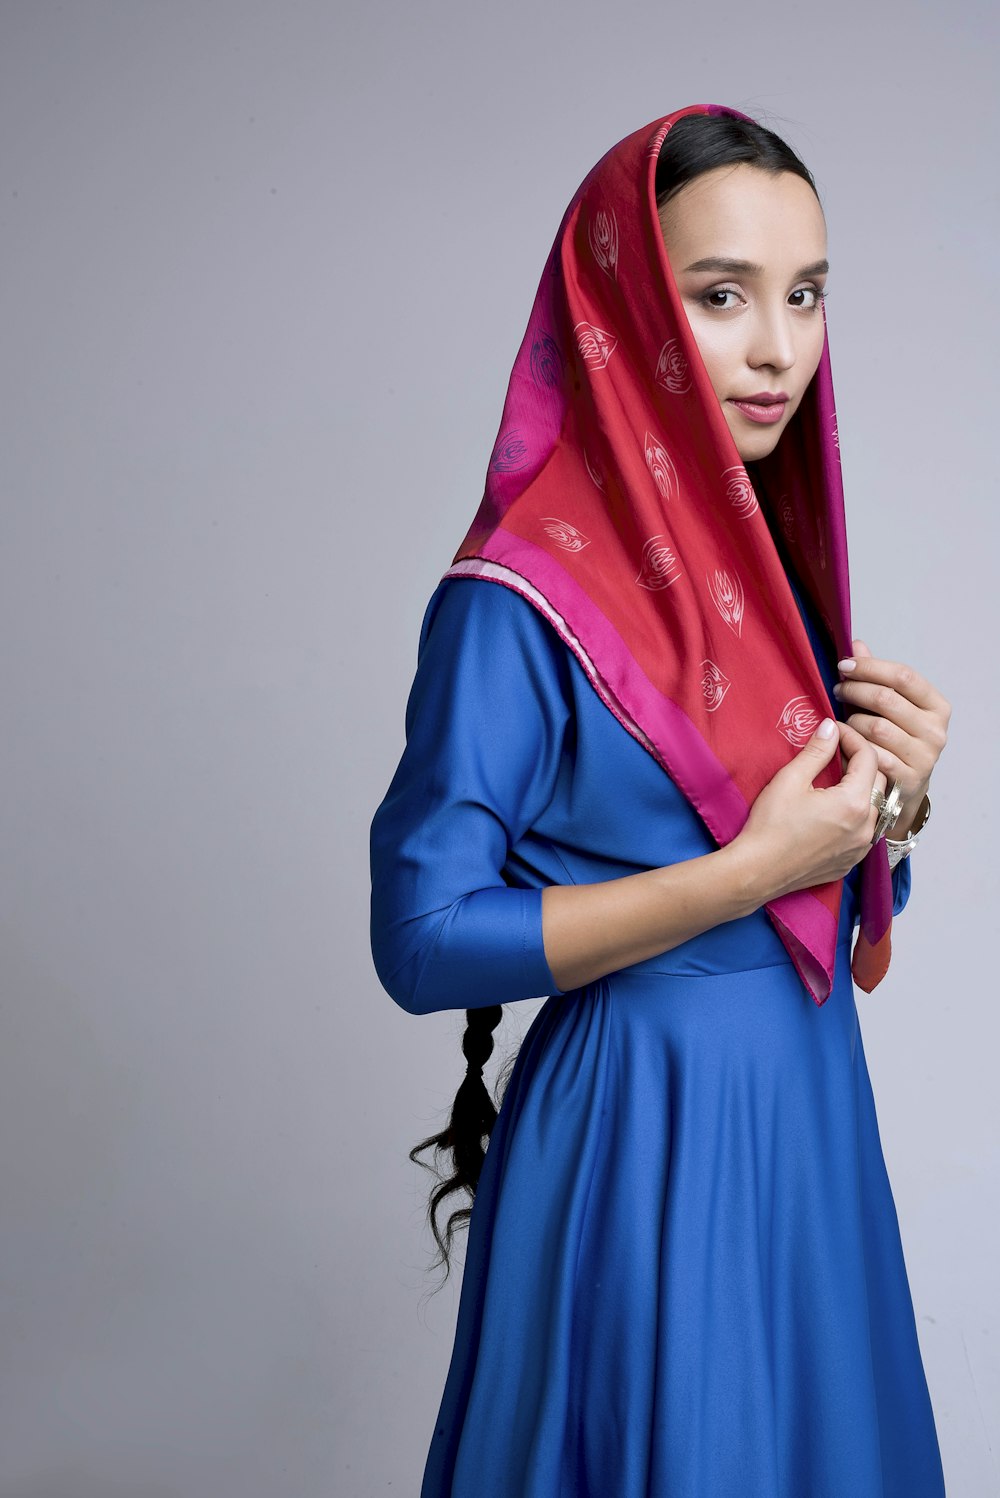 woman in blue and red traditional dress